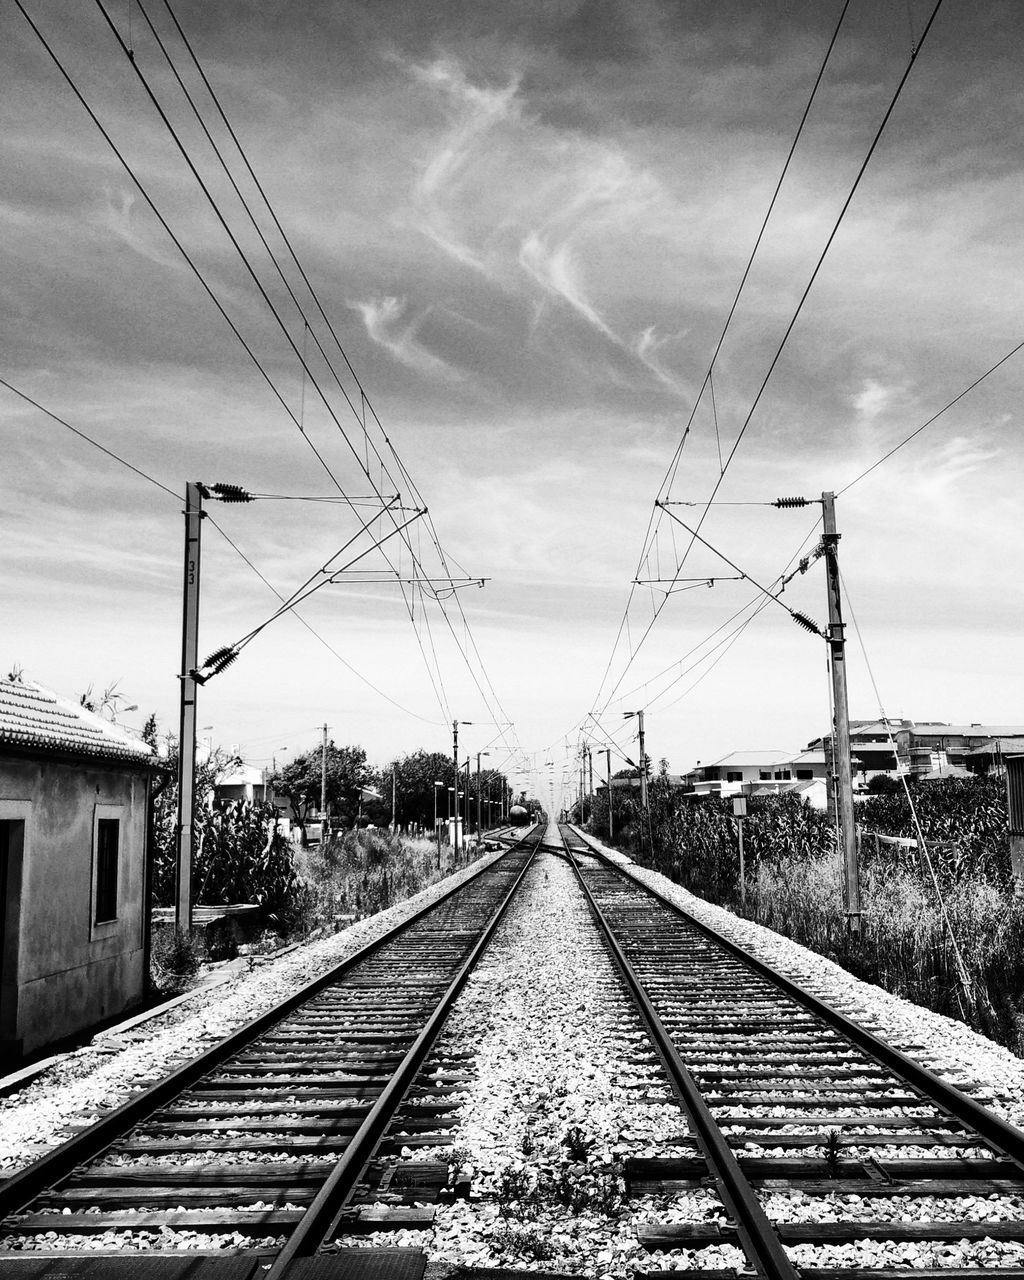 railroad track, rail transportation, power line, transportation, the way forward, sky, electricity pylon, diminishing perspective, electricity, vanishing point, public transportation, cable, connection, power supply, cloud - sky, railway track, railroad station platform, railroad station, fuel and power generation, cloud